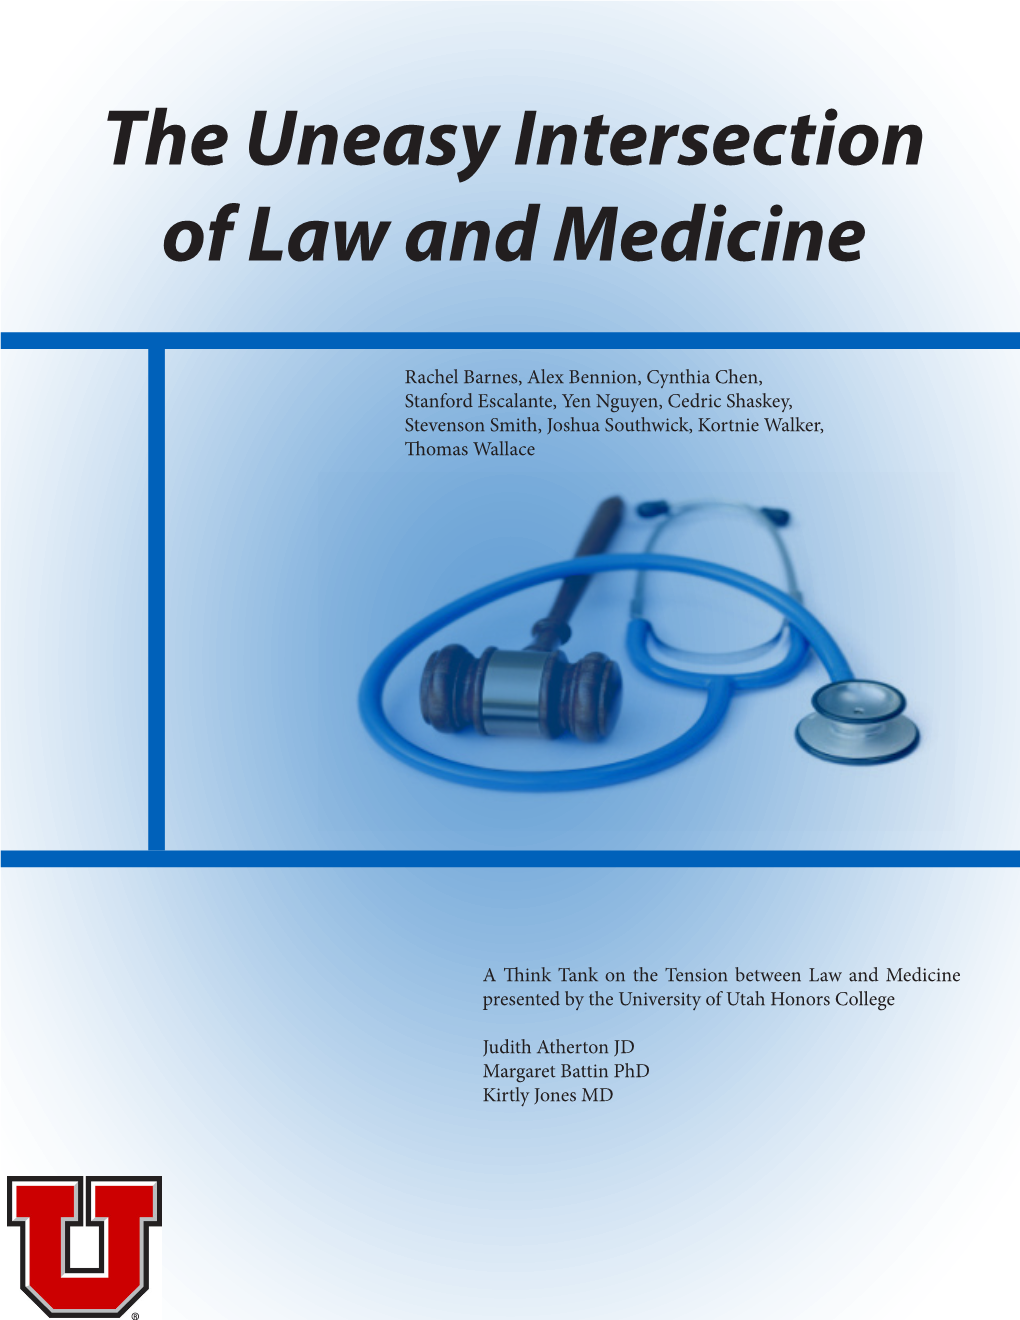 The Uneasy Intersection of Law and Medicine